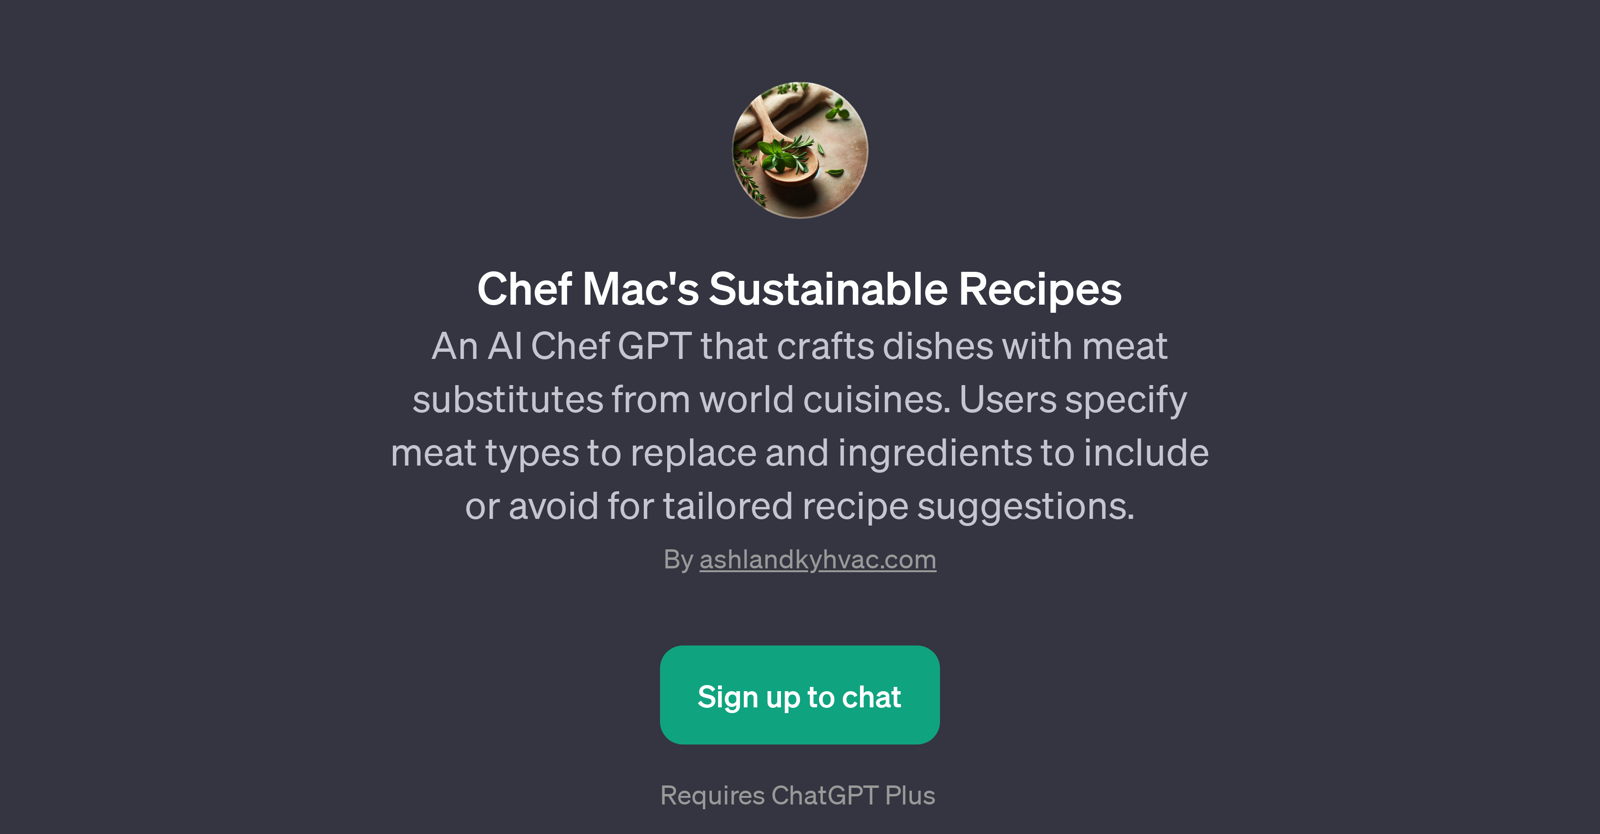 Chef Mac's Sustainable Recipes website